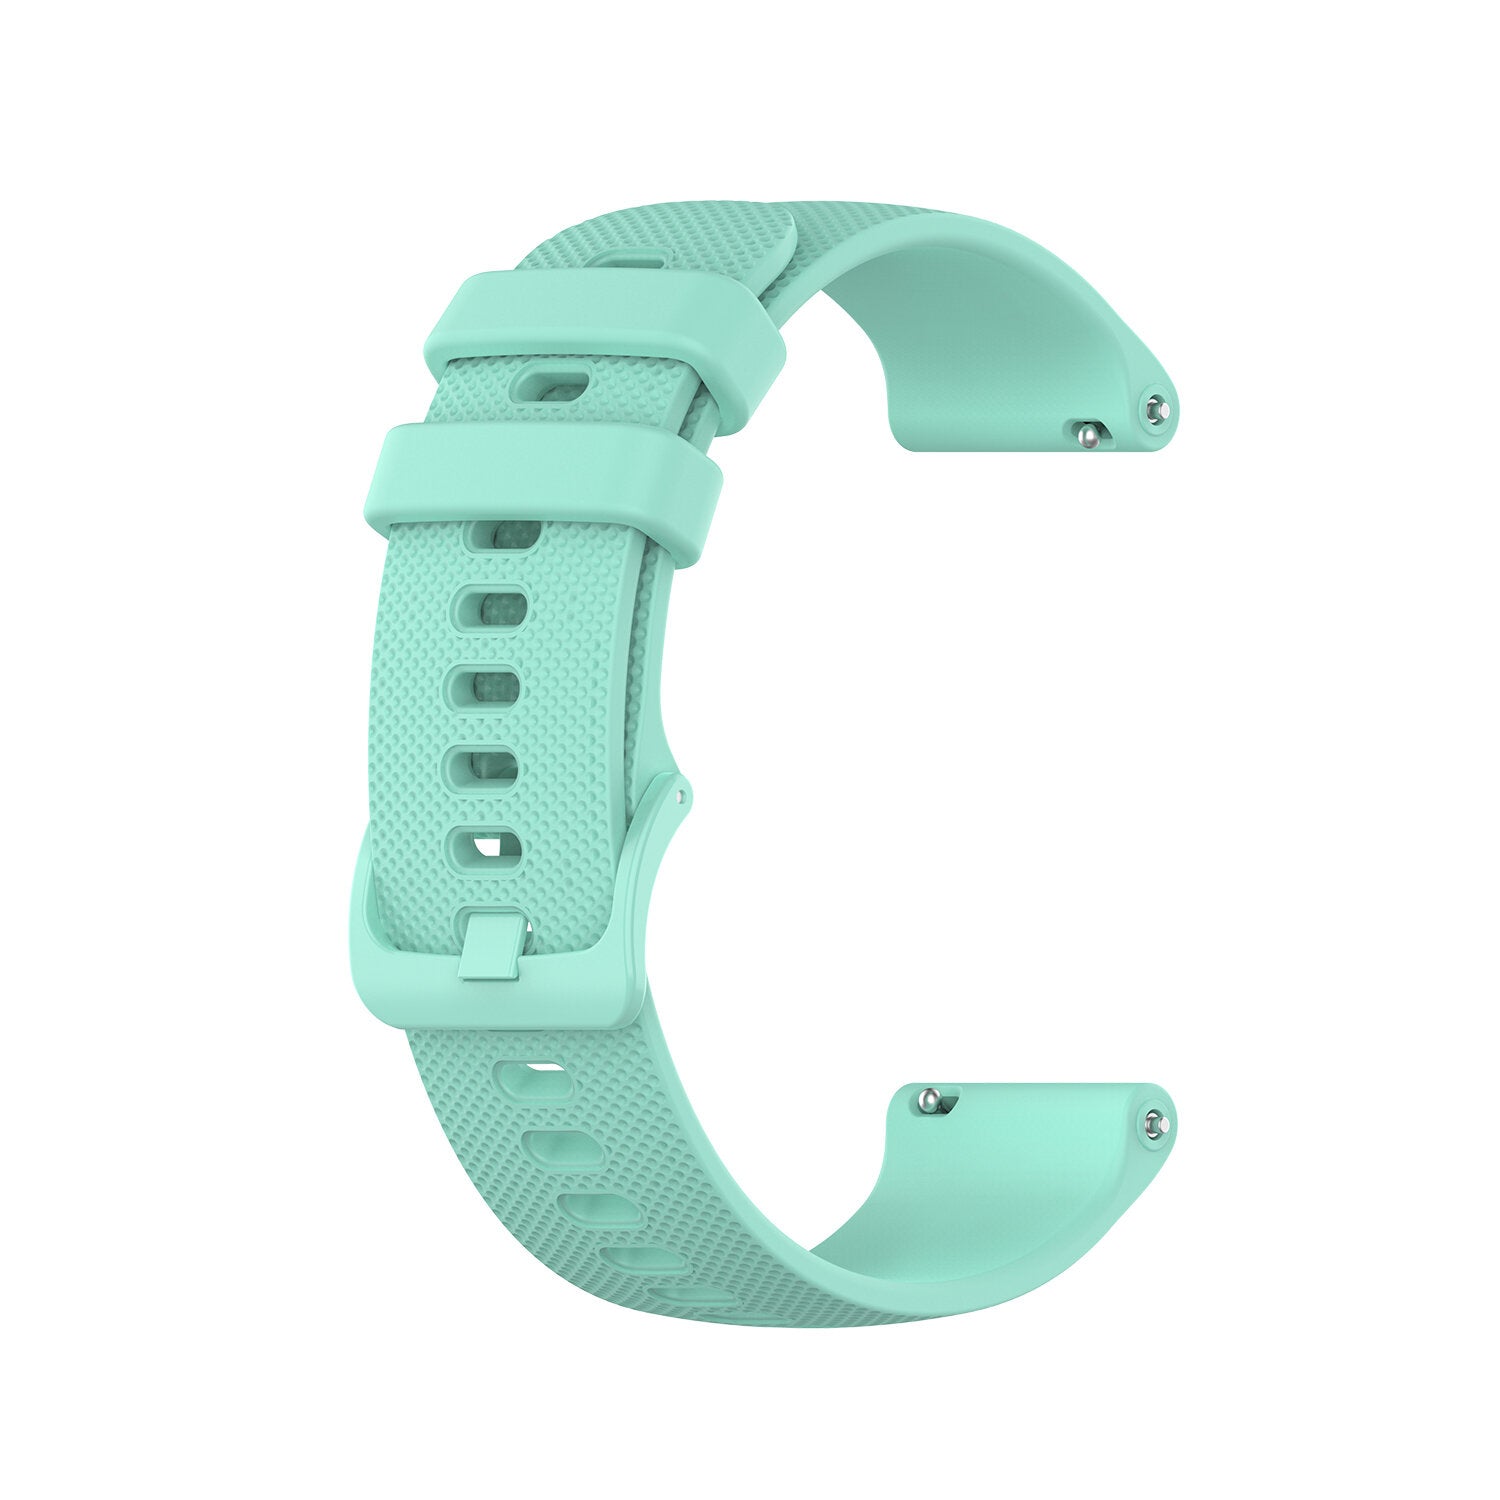 20mm Silicone Plaid Watch Band Replacement For 42mm Smart Watch